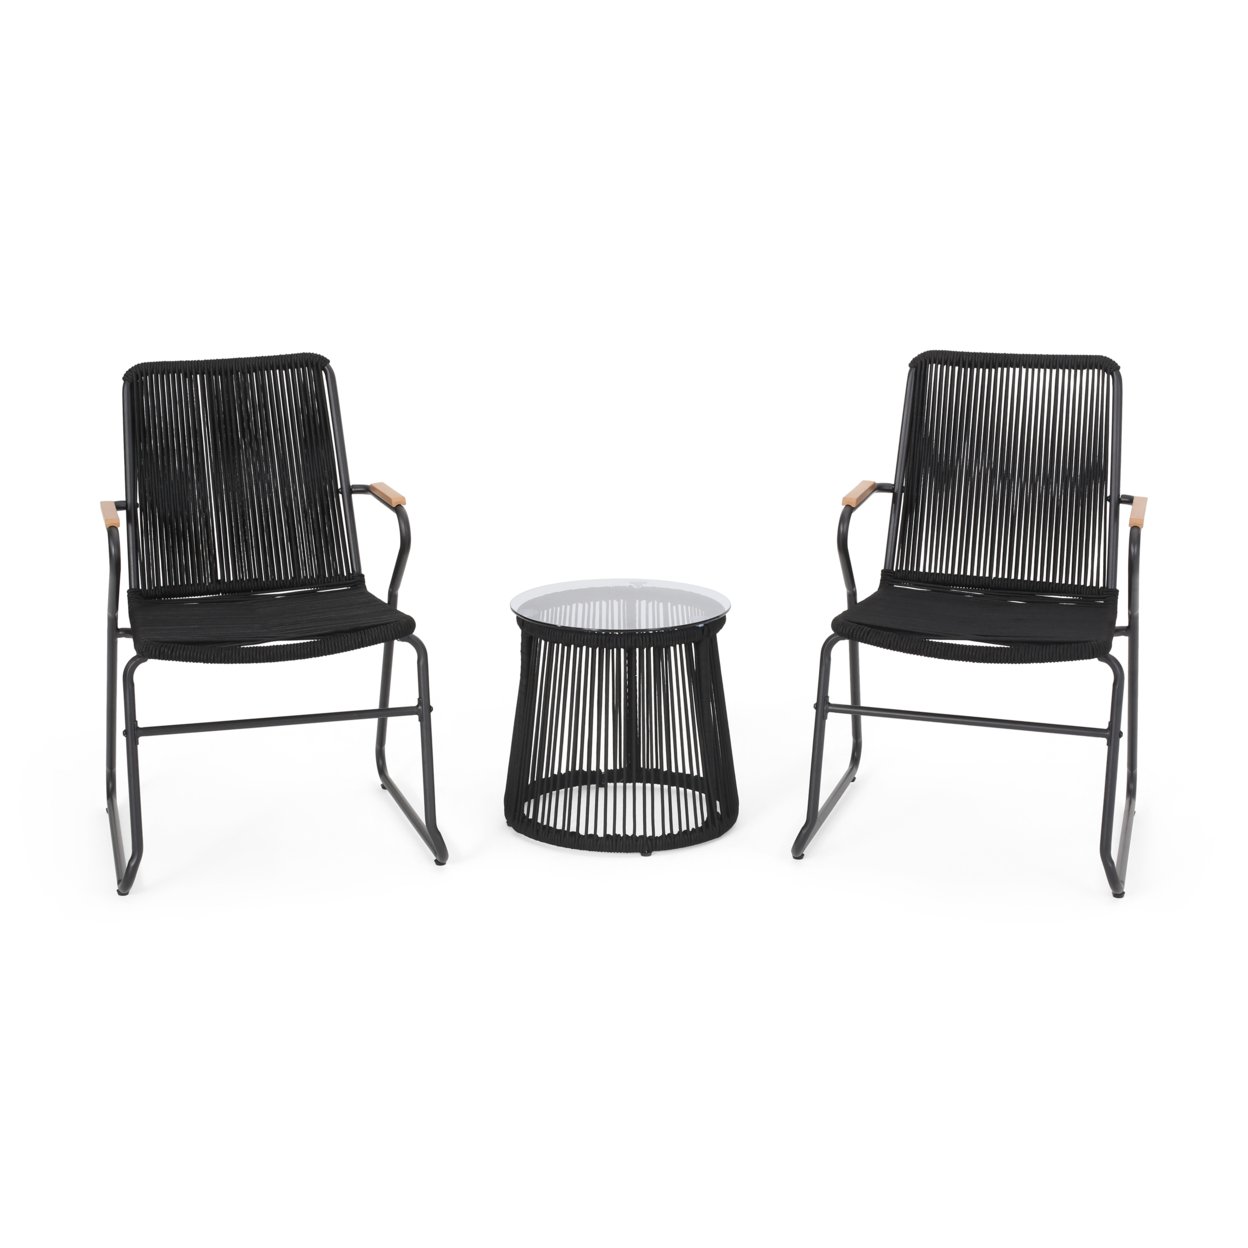 Luca Modern Outdoor Rope Weave Chat Set With Side Table